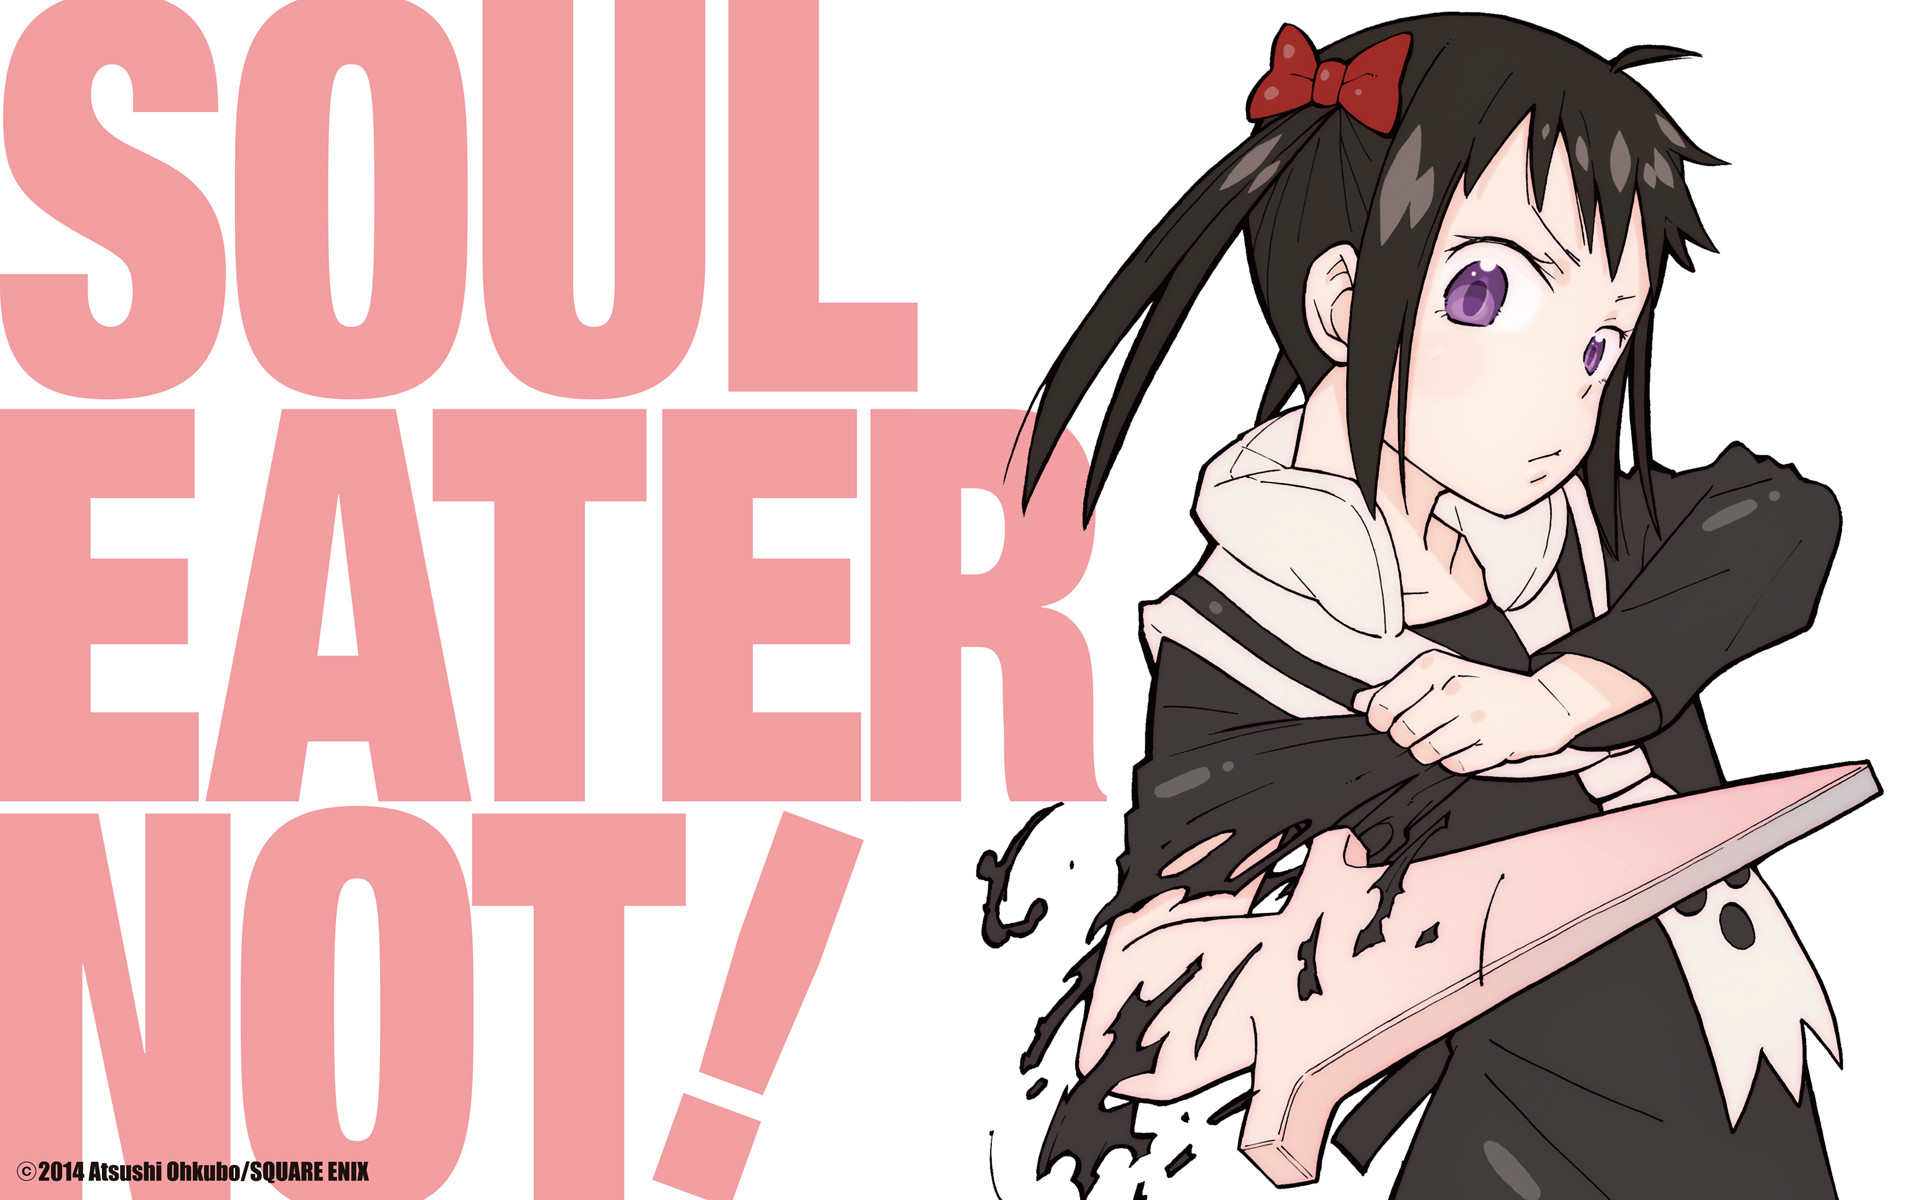 1920x1200 The imagination anime club images Soul Eater Not Artwork 3 HD wallpaper and  background photos